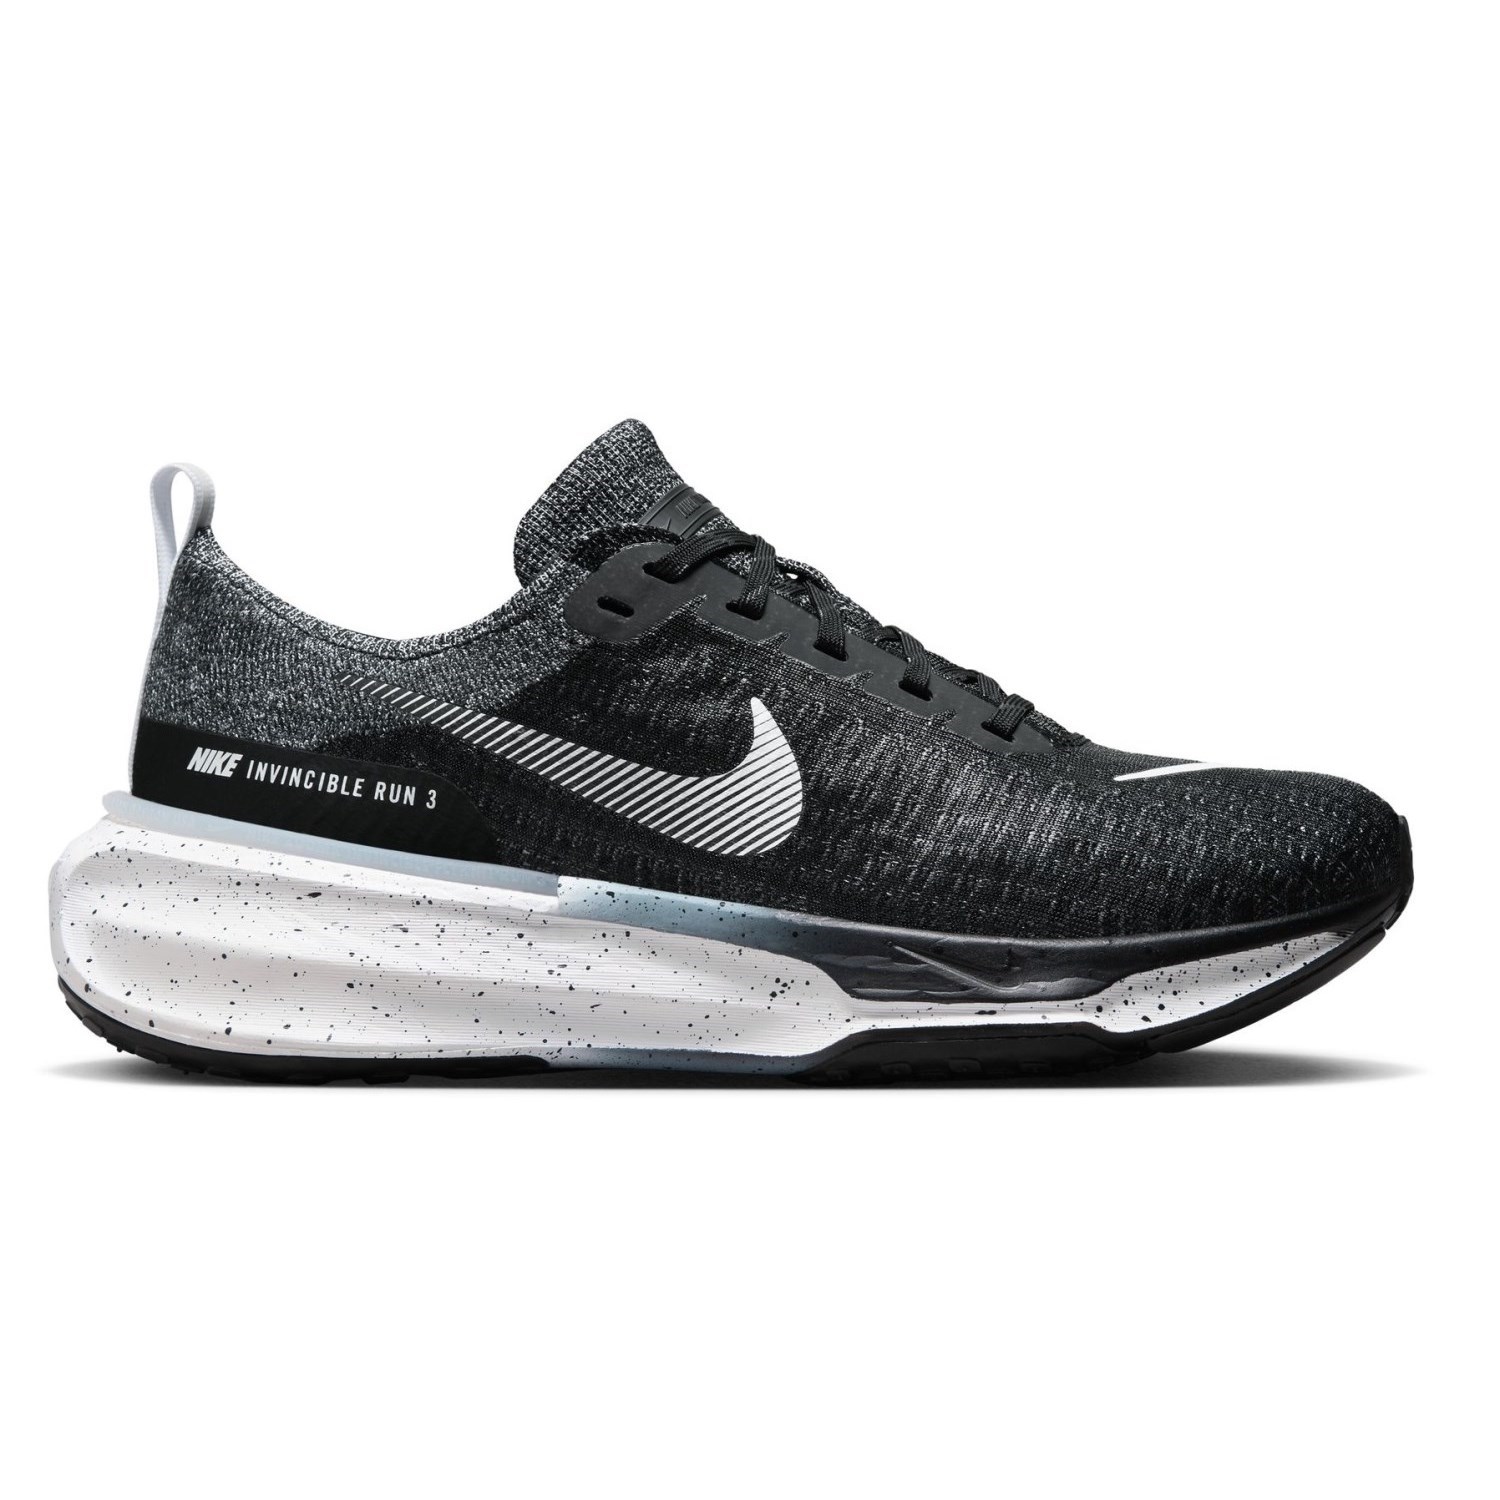 Nike ZoomX Invincible Run Flyknit 3 - Mens Running Shoes - Black/White ...